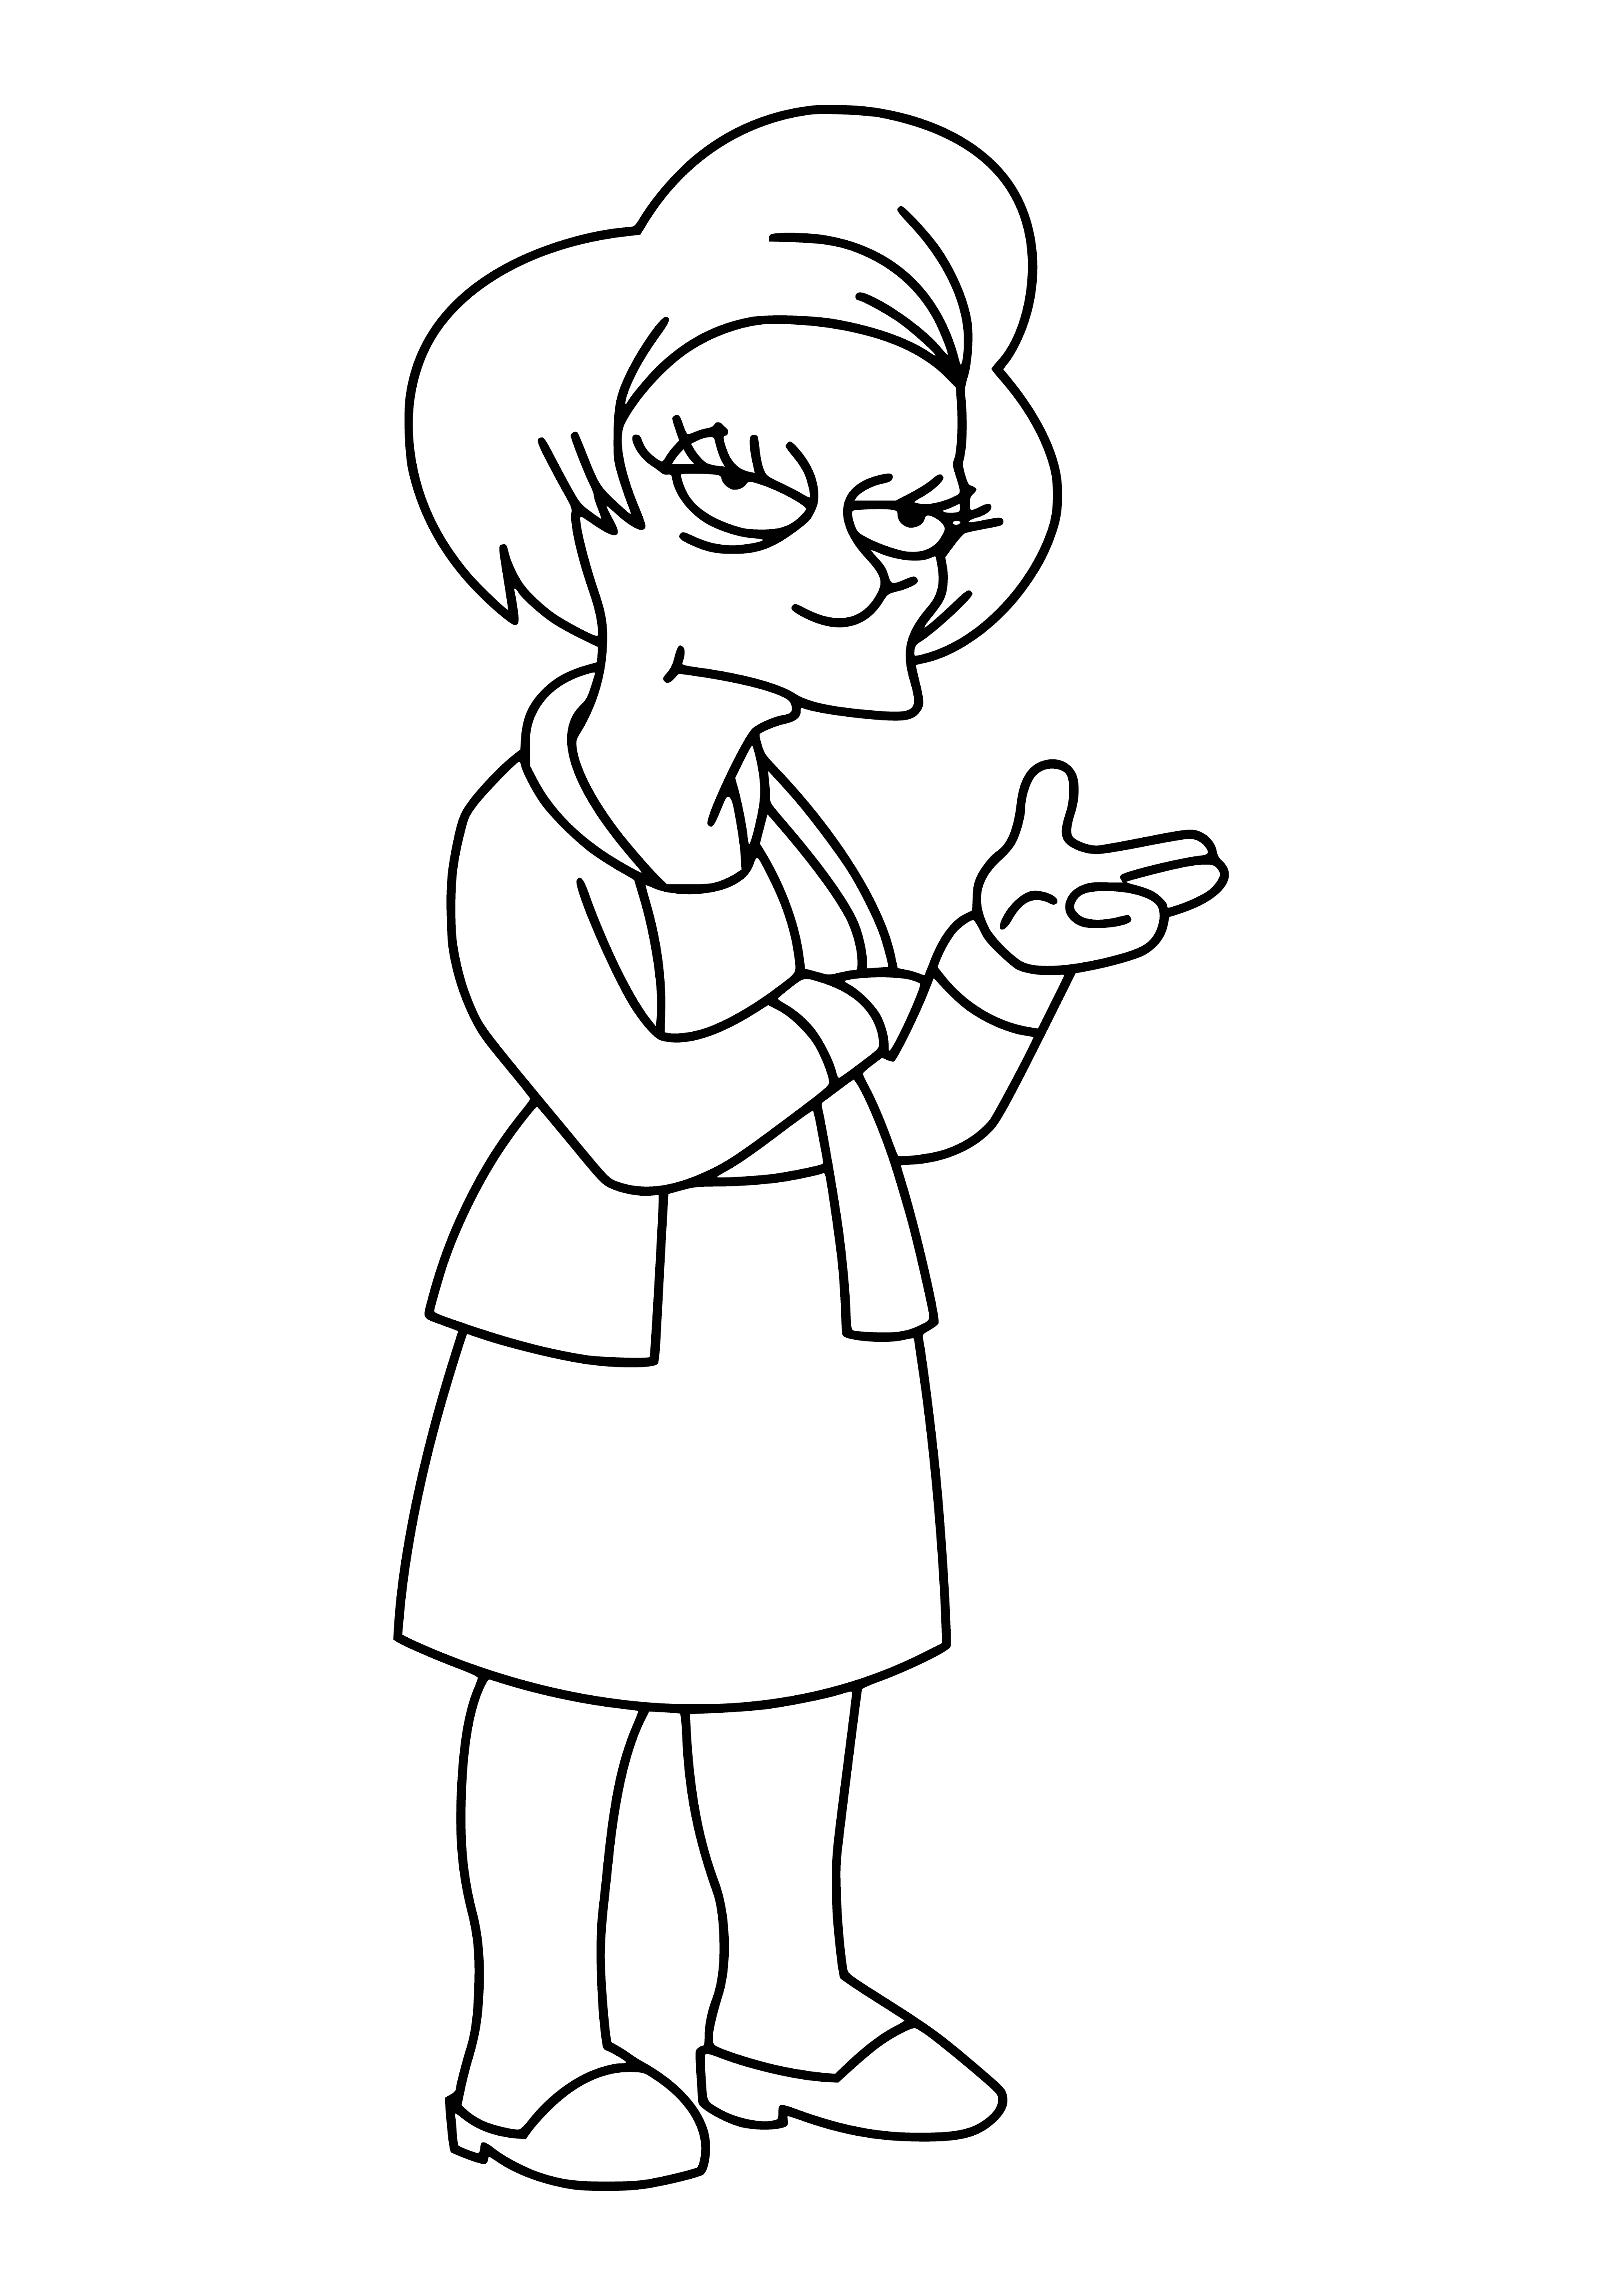 Teacher Edna Crabapple coloring page